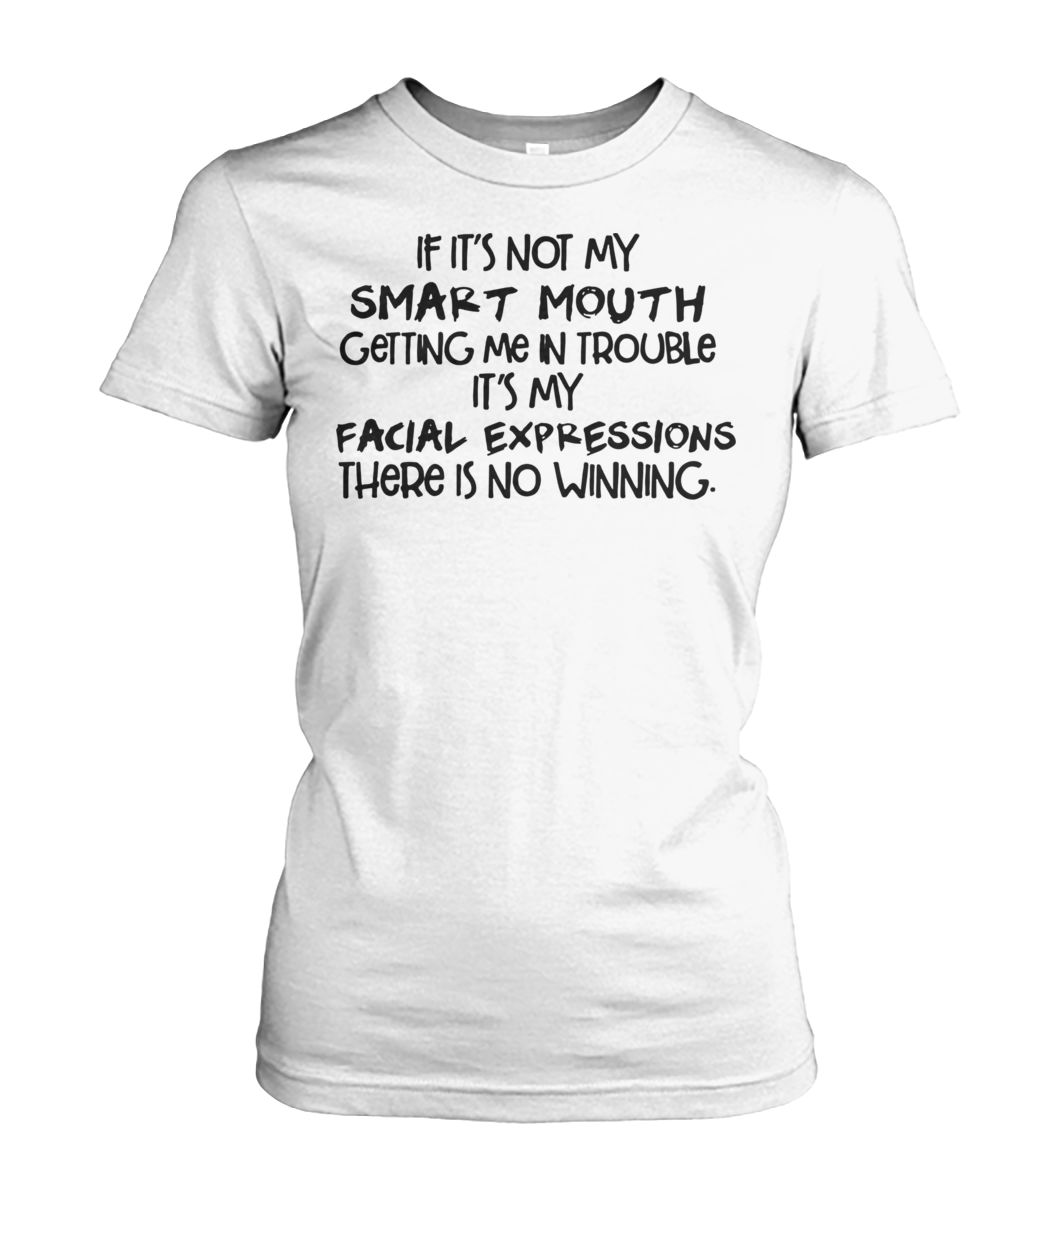 If it's not my smart mouth getting me in trouble it's my facial expressions women's crew tee